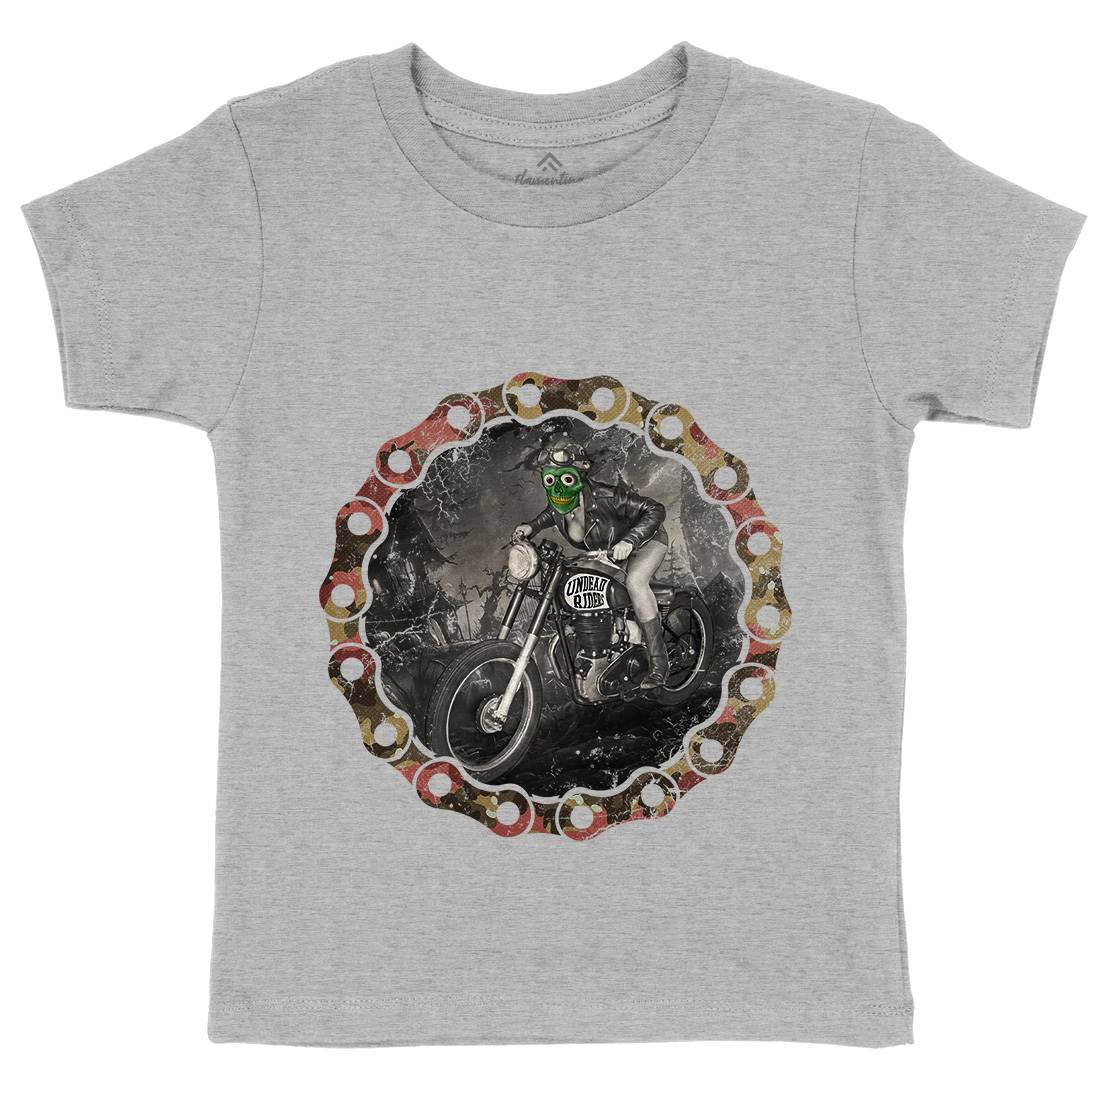 Undead Riders Kids Organic Crew Neck T-Shirt Motorcycles A937